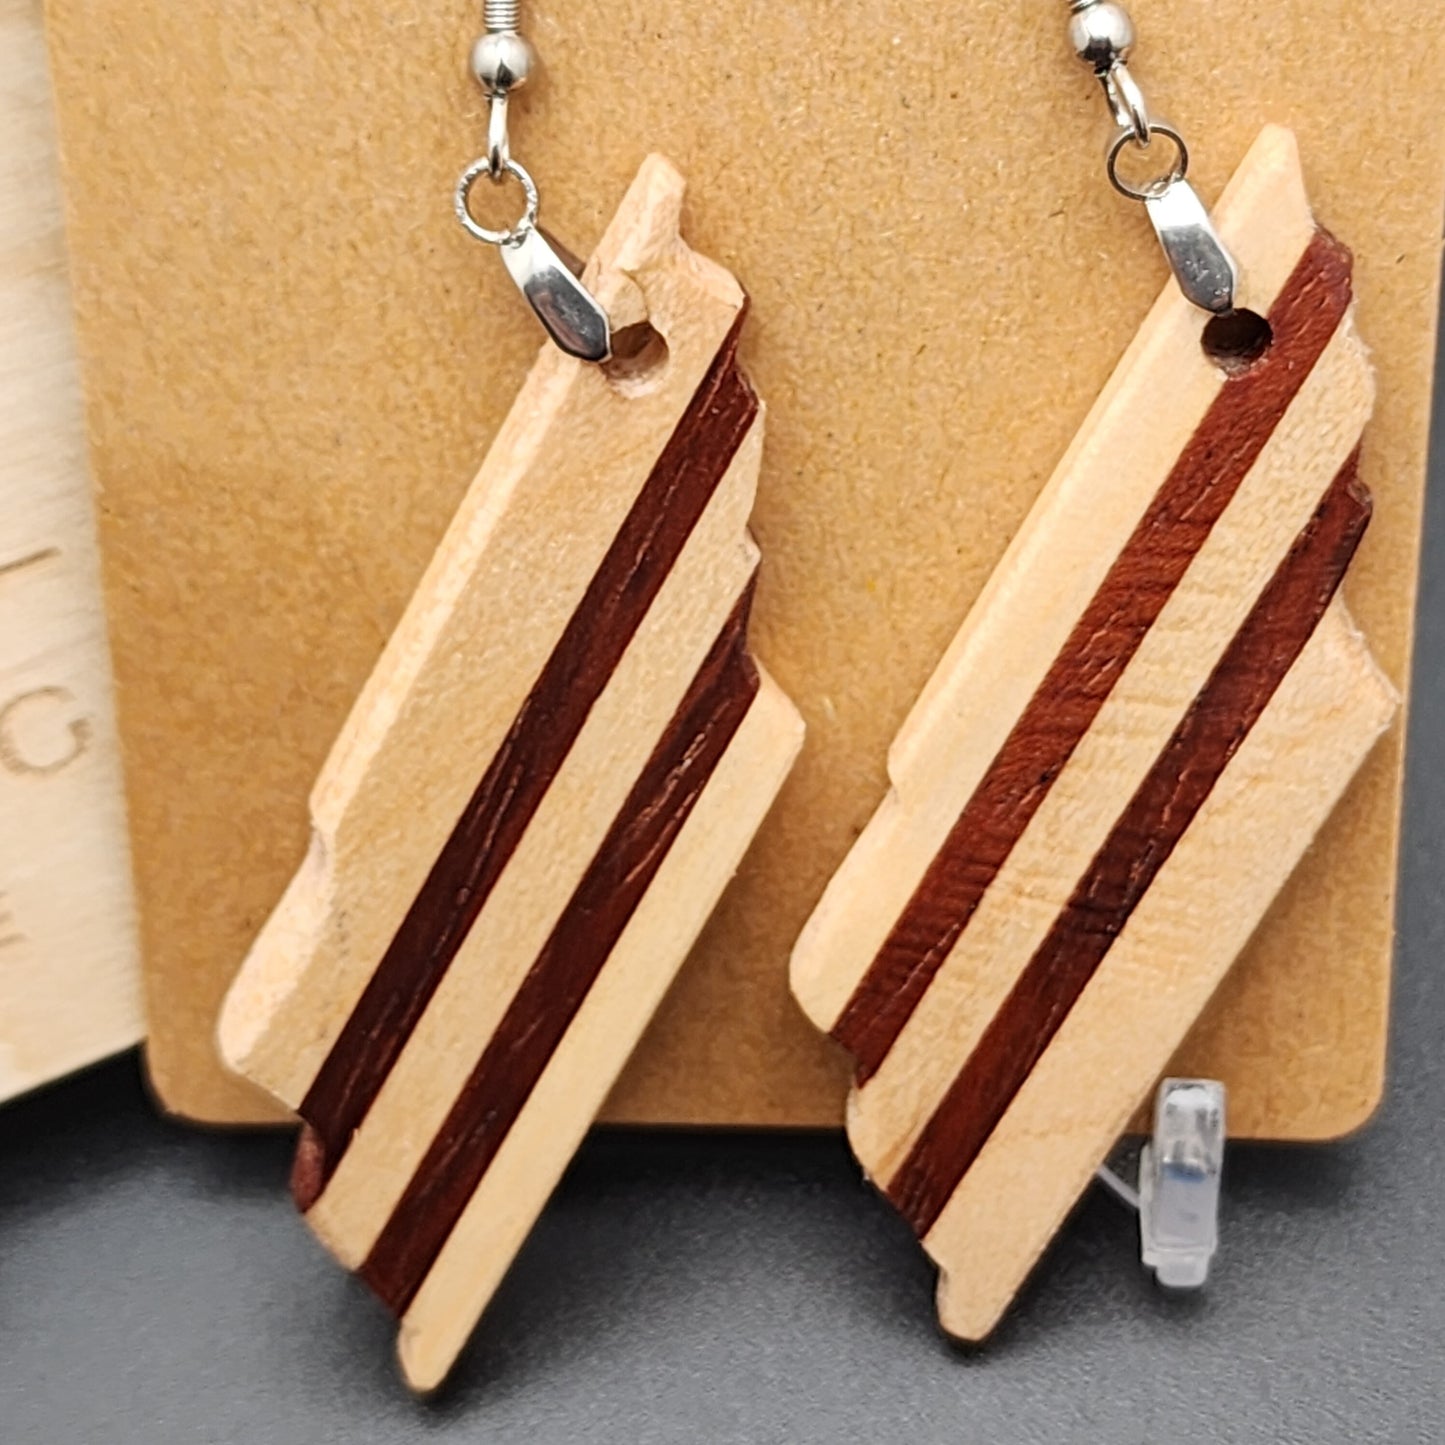 State of Tennessee - Exotic Wood Earrings - Jatoba and Maple, Hypo-Allergenic Stainless Steel Hooks